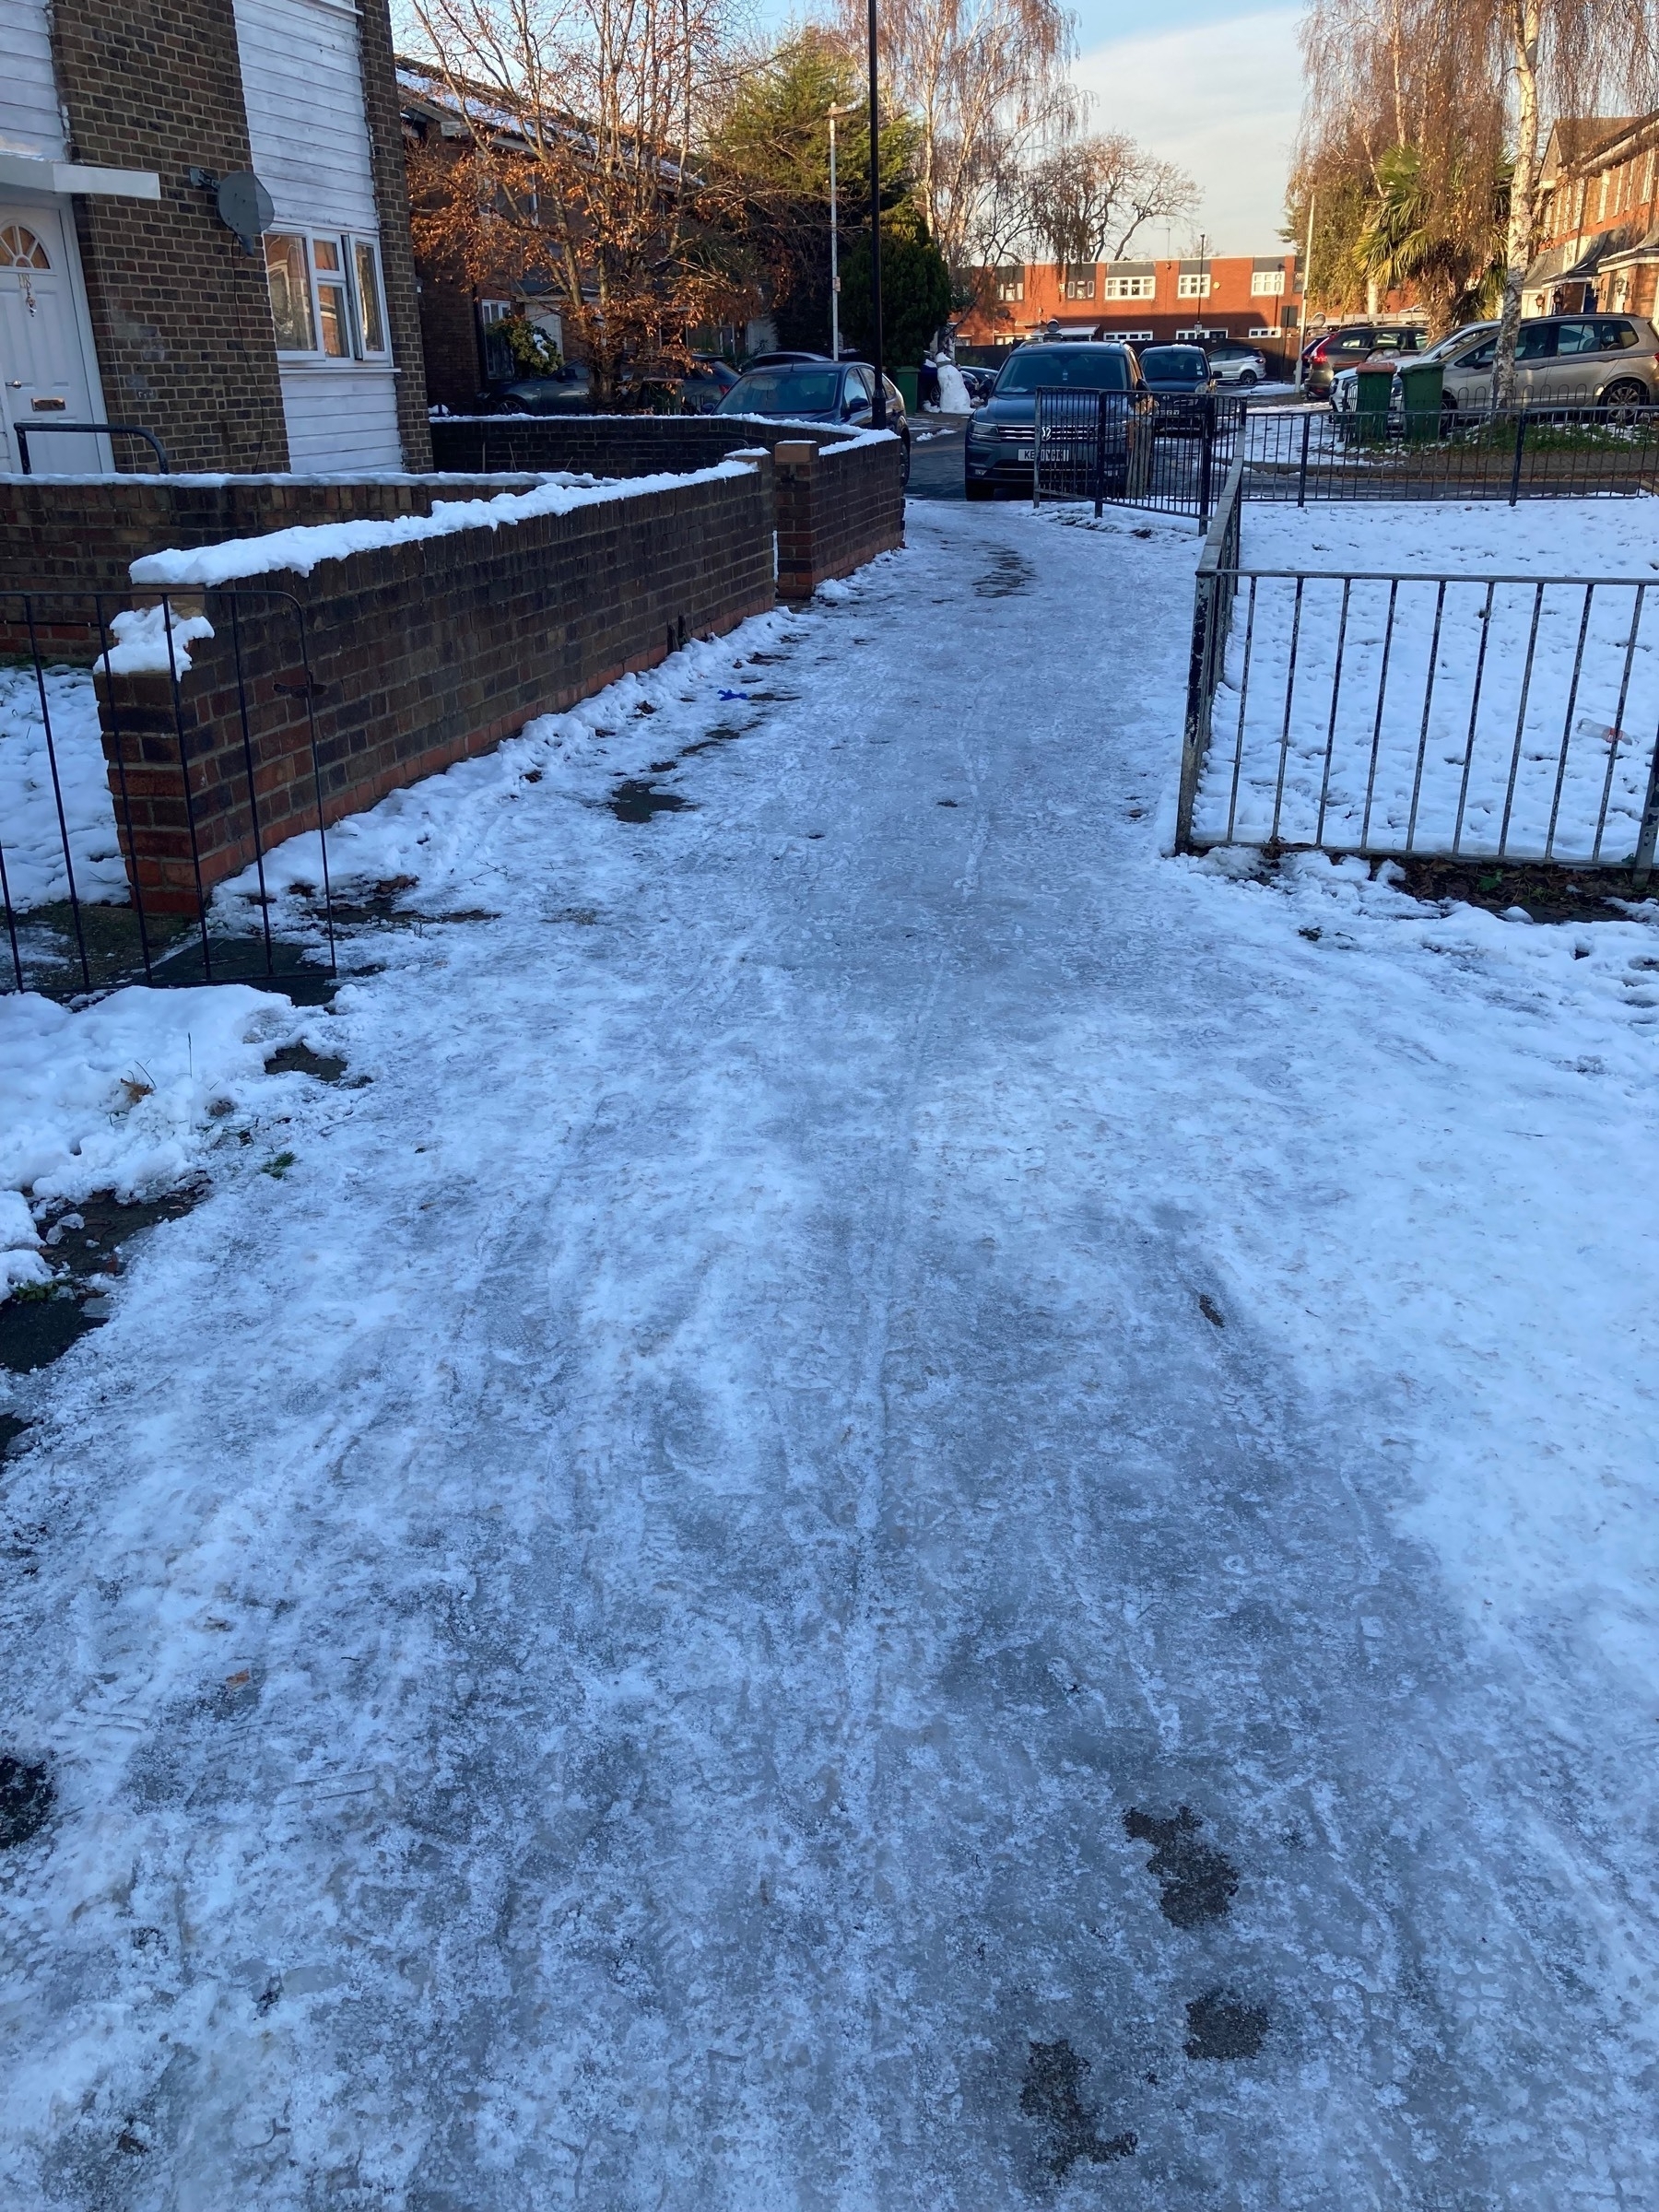 An icy pavement in Custom House, East London